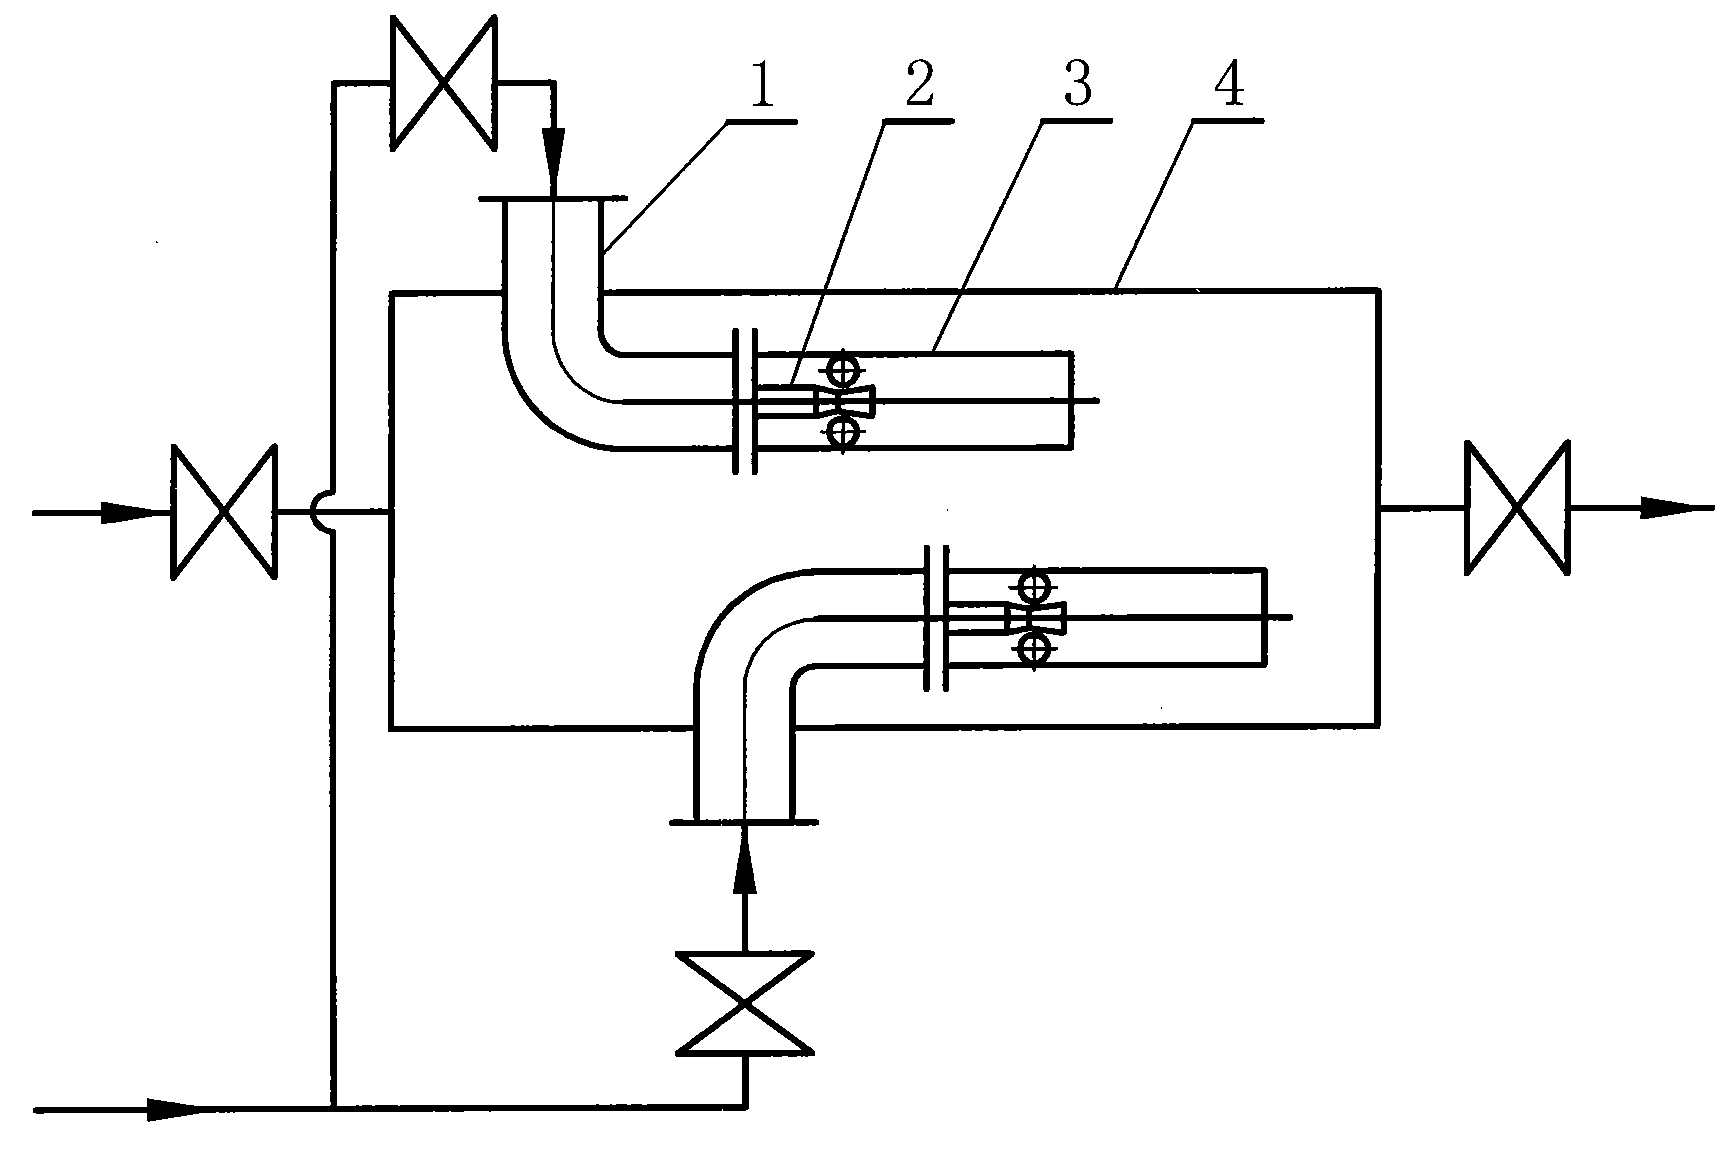 Multi-nozzle and multi-channel heater of steam-water two phase flow mixed type